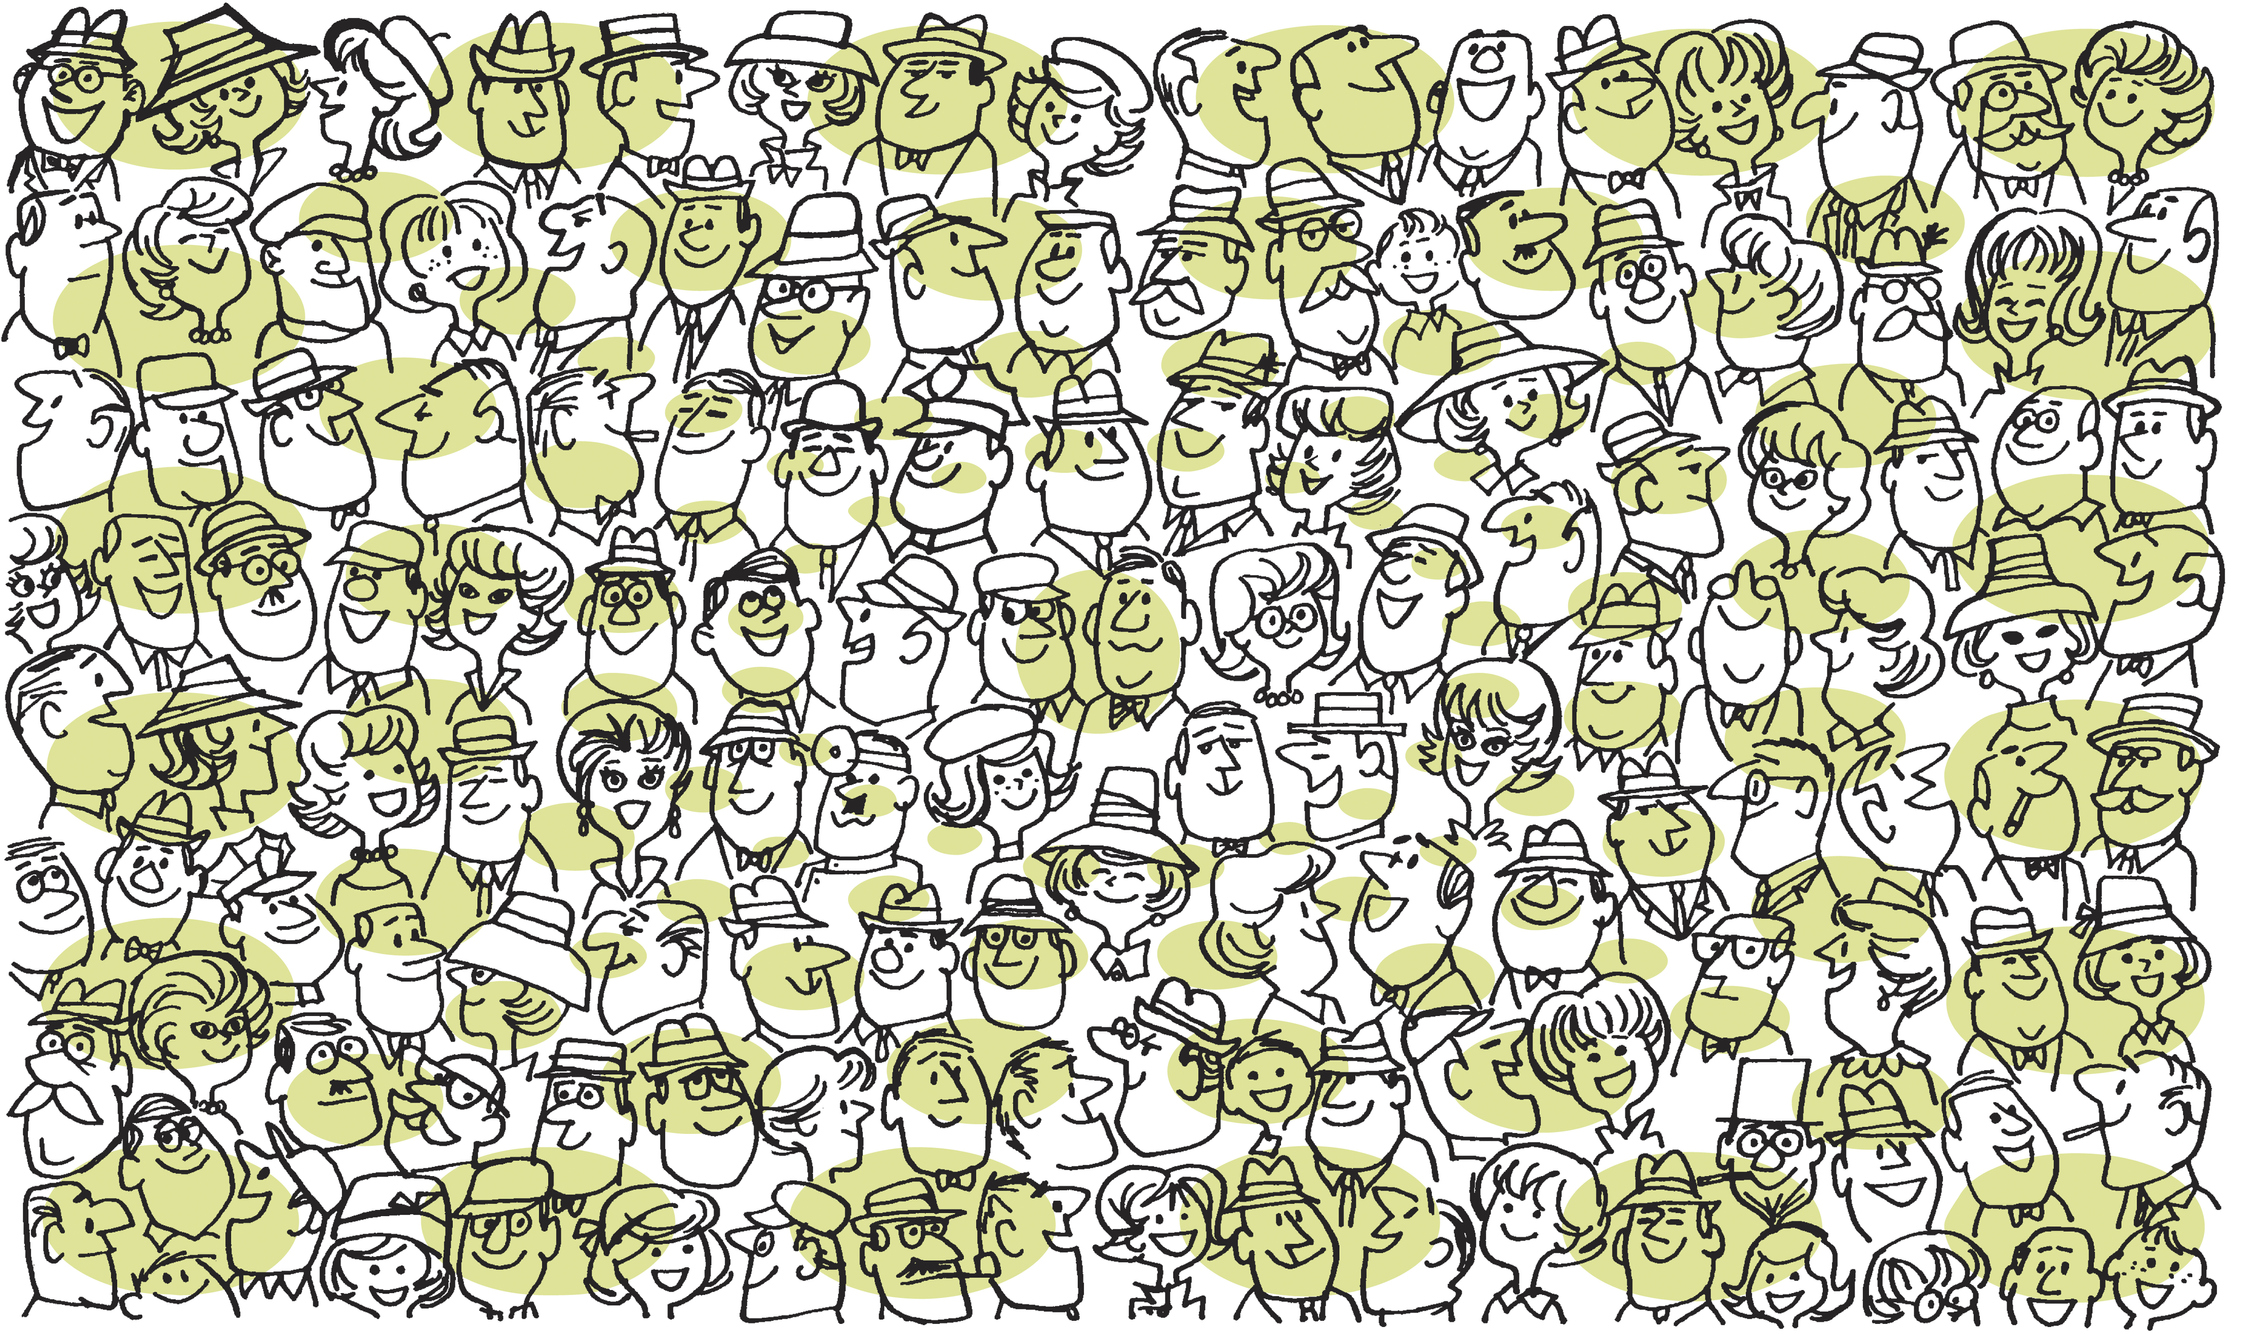 A cartoon of large group of people enjoying themselves.